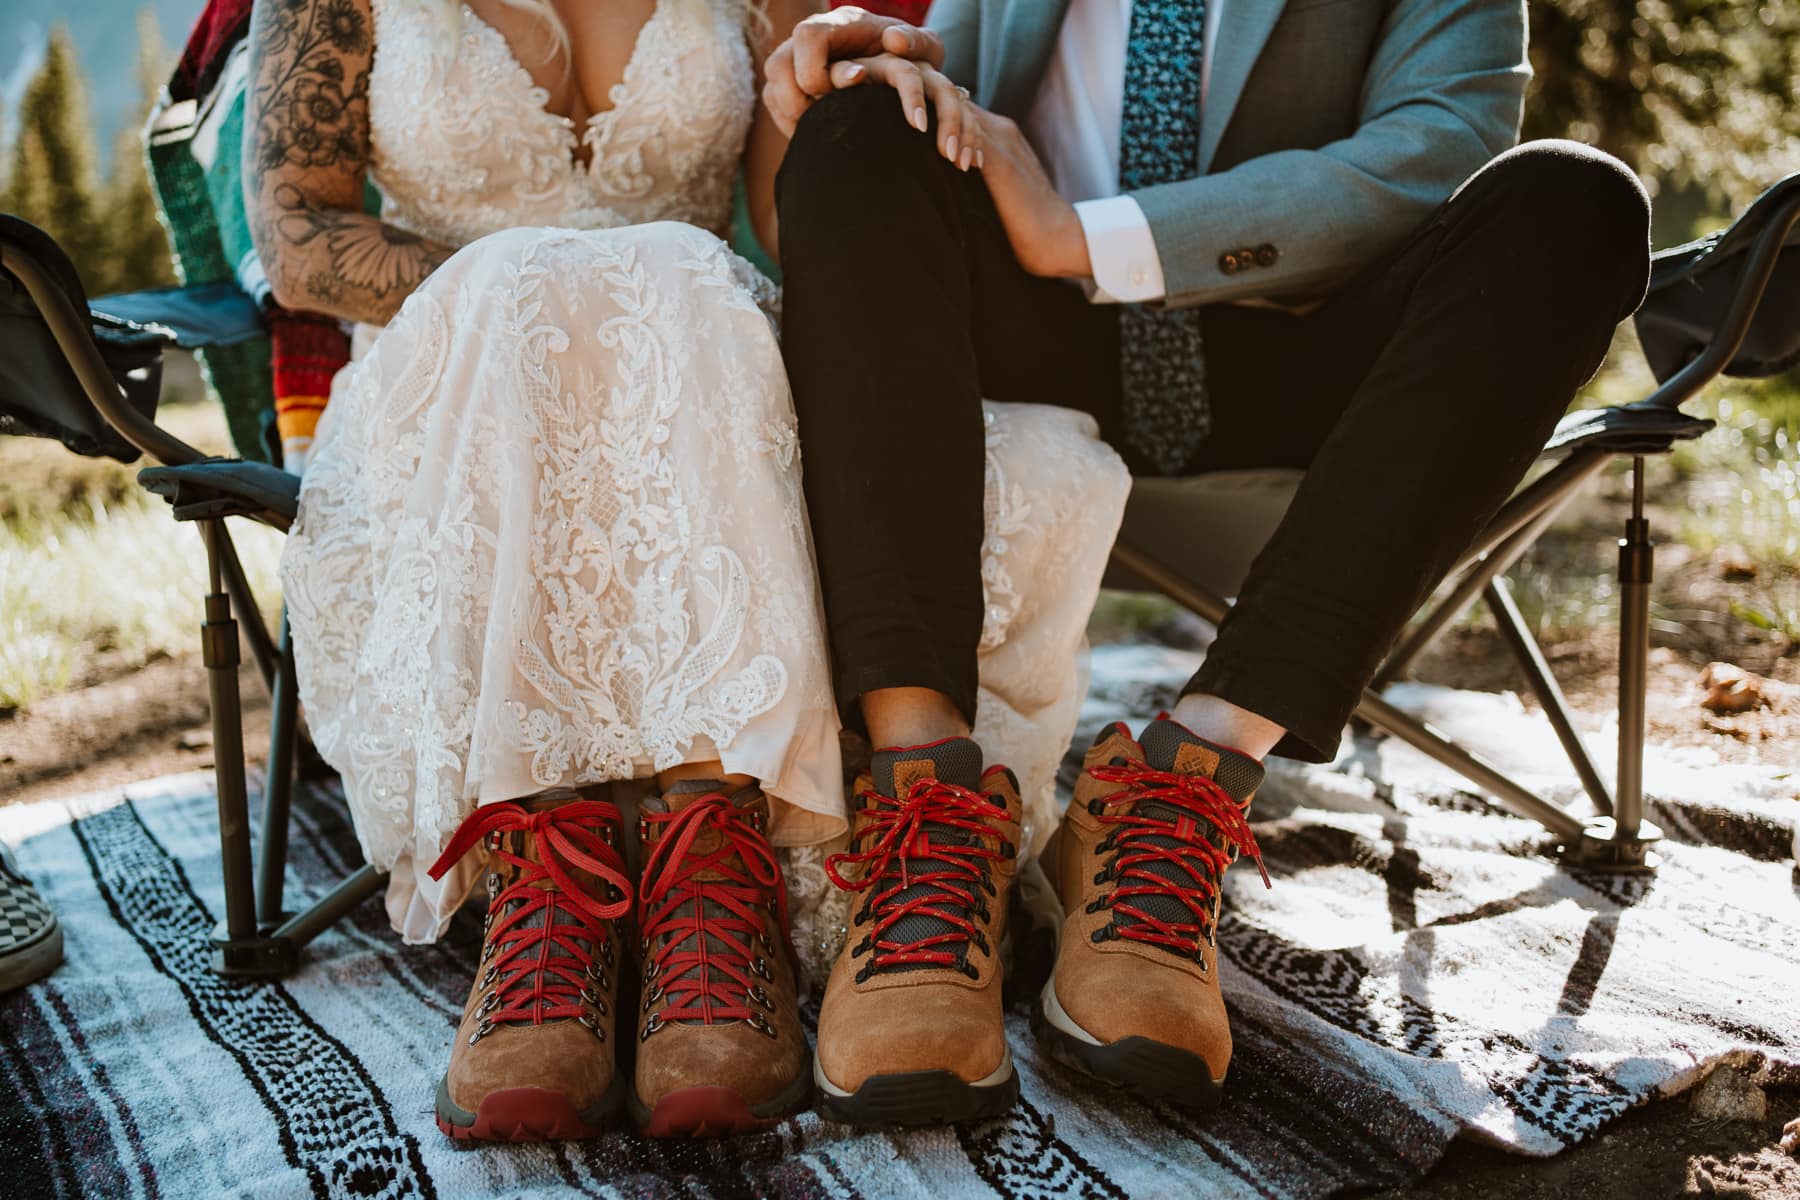 The Complete Hiking Wedding & Elopement Guide: How to Plan an Epic